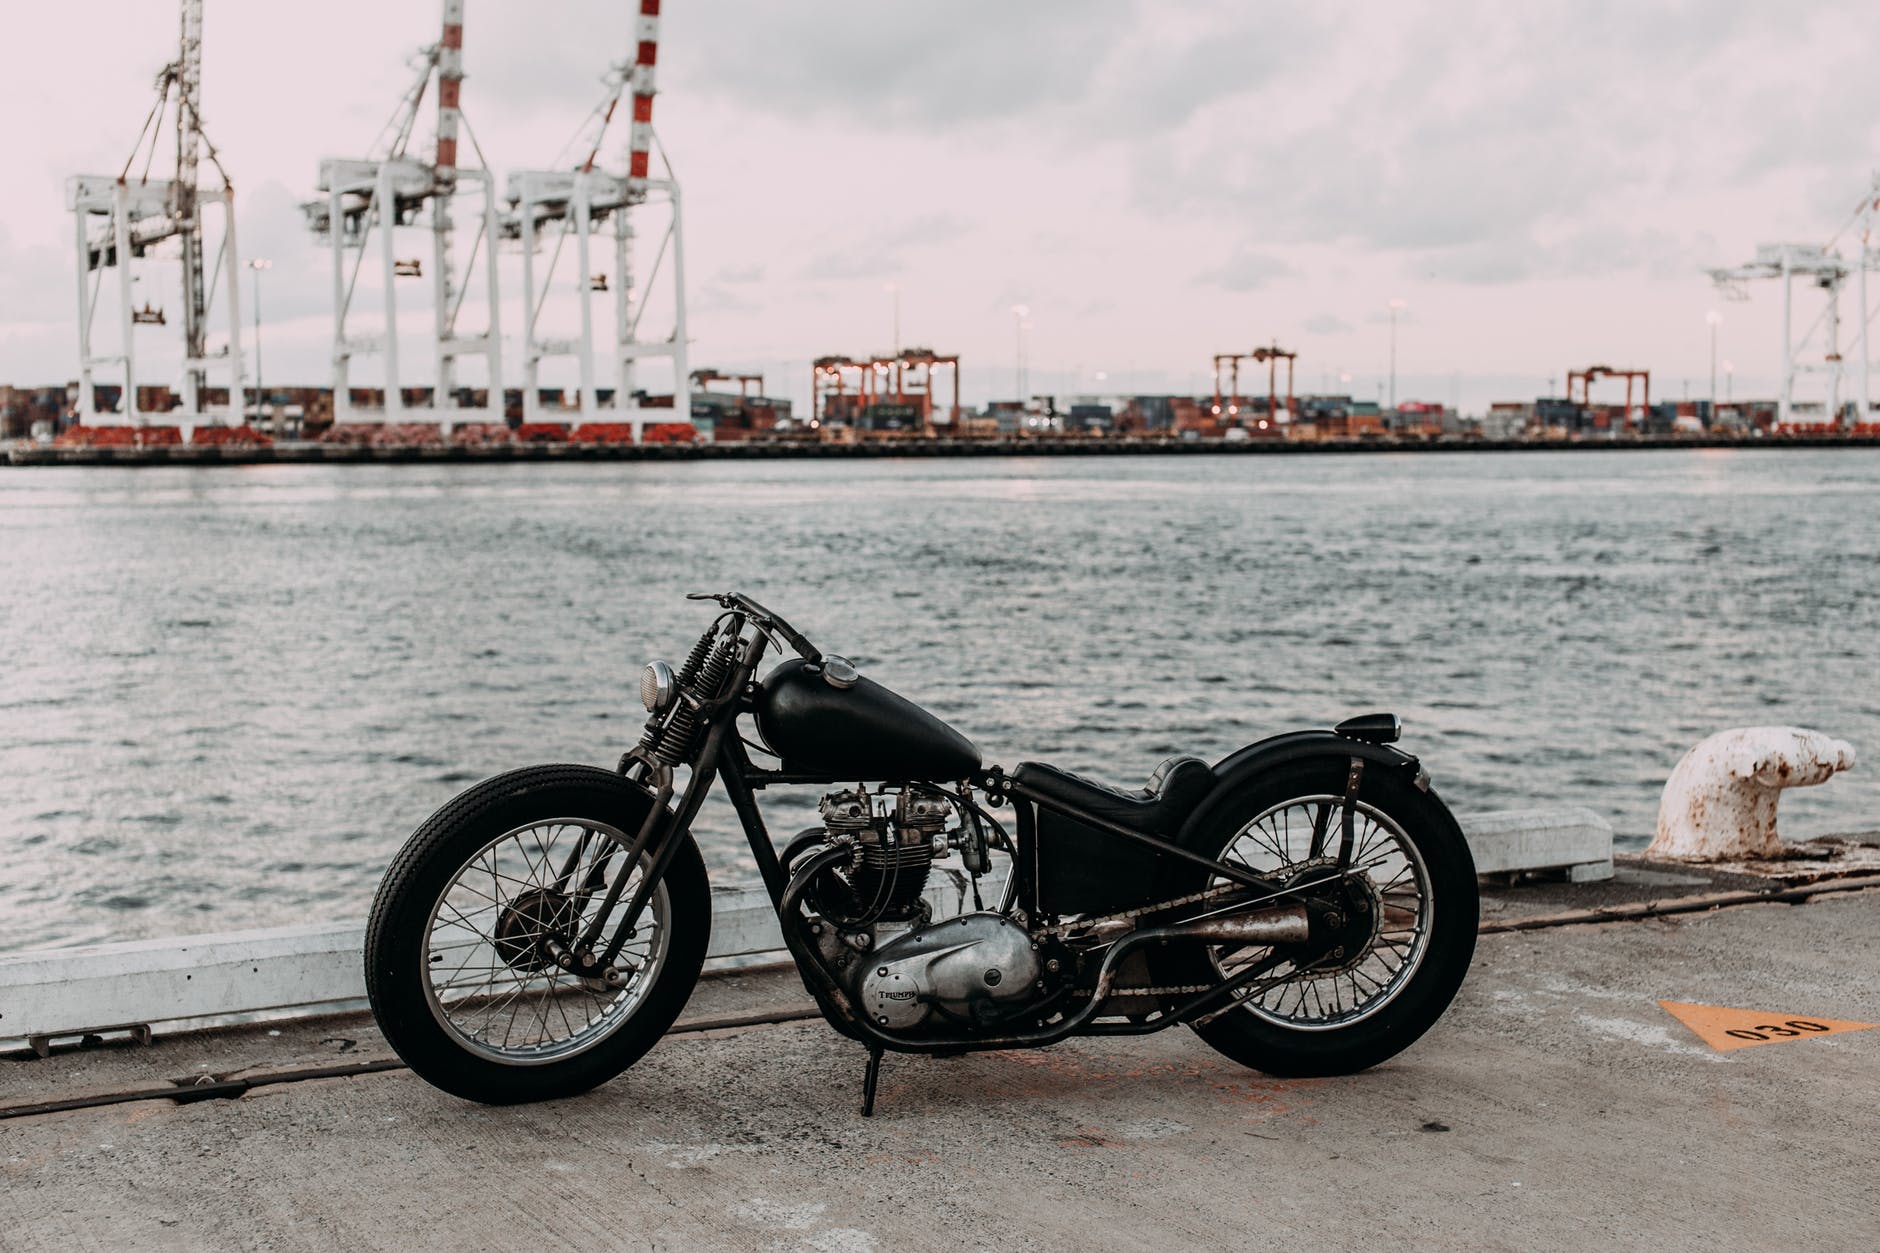 Motorcycle standing on a dock overlooking a port